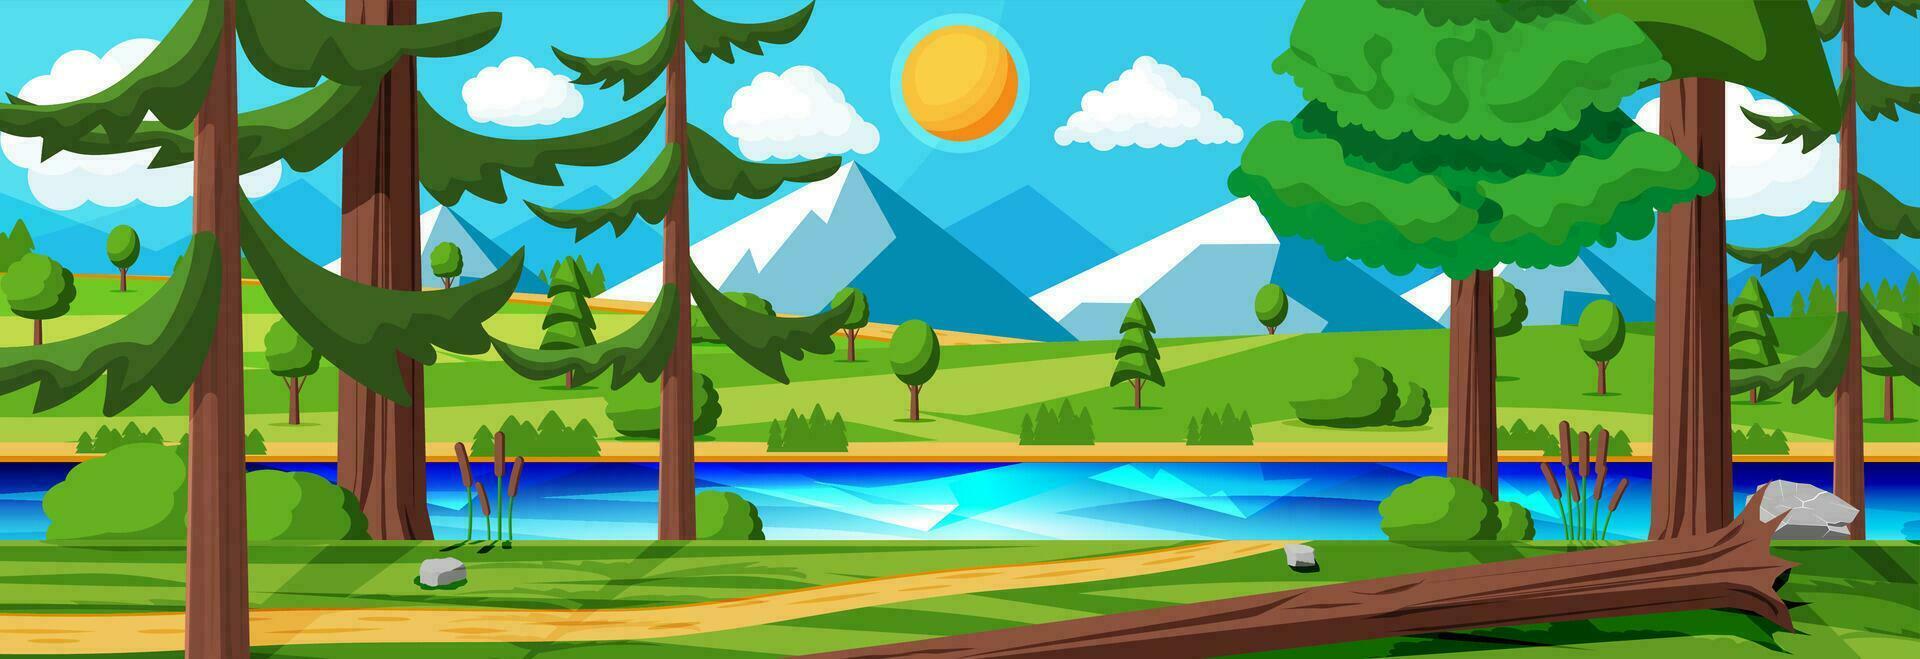 Landscape Of Mountains And Green Hills. Summer Nature Landscape With Rocks, Forest, Grass, Sun, Sky, Lake and Clouds. National Park or Nature Reserve. Vector Illustration In Flat Style